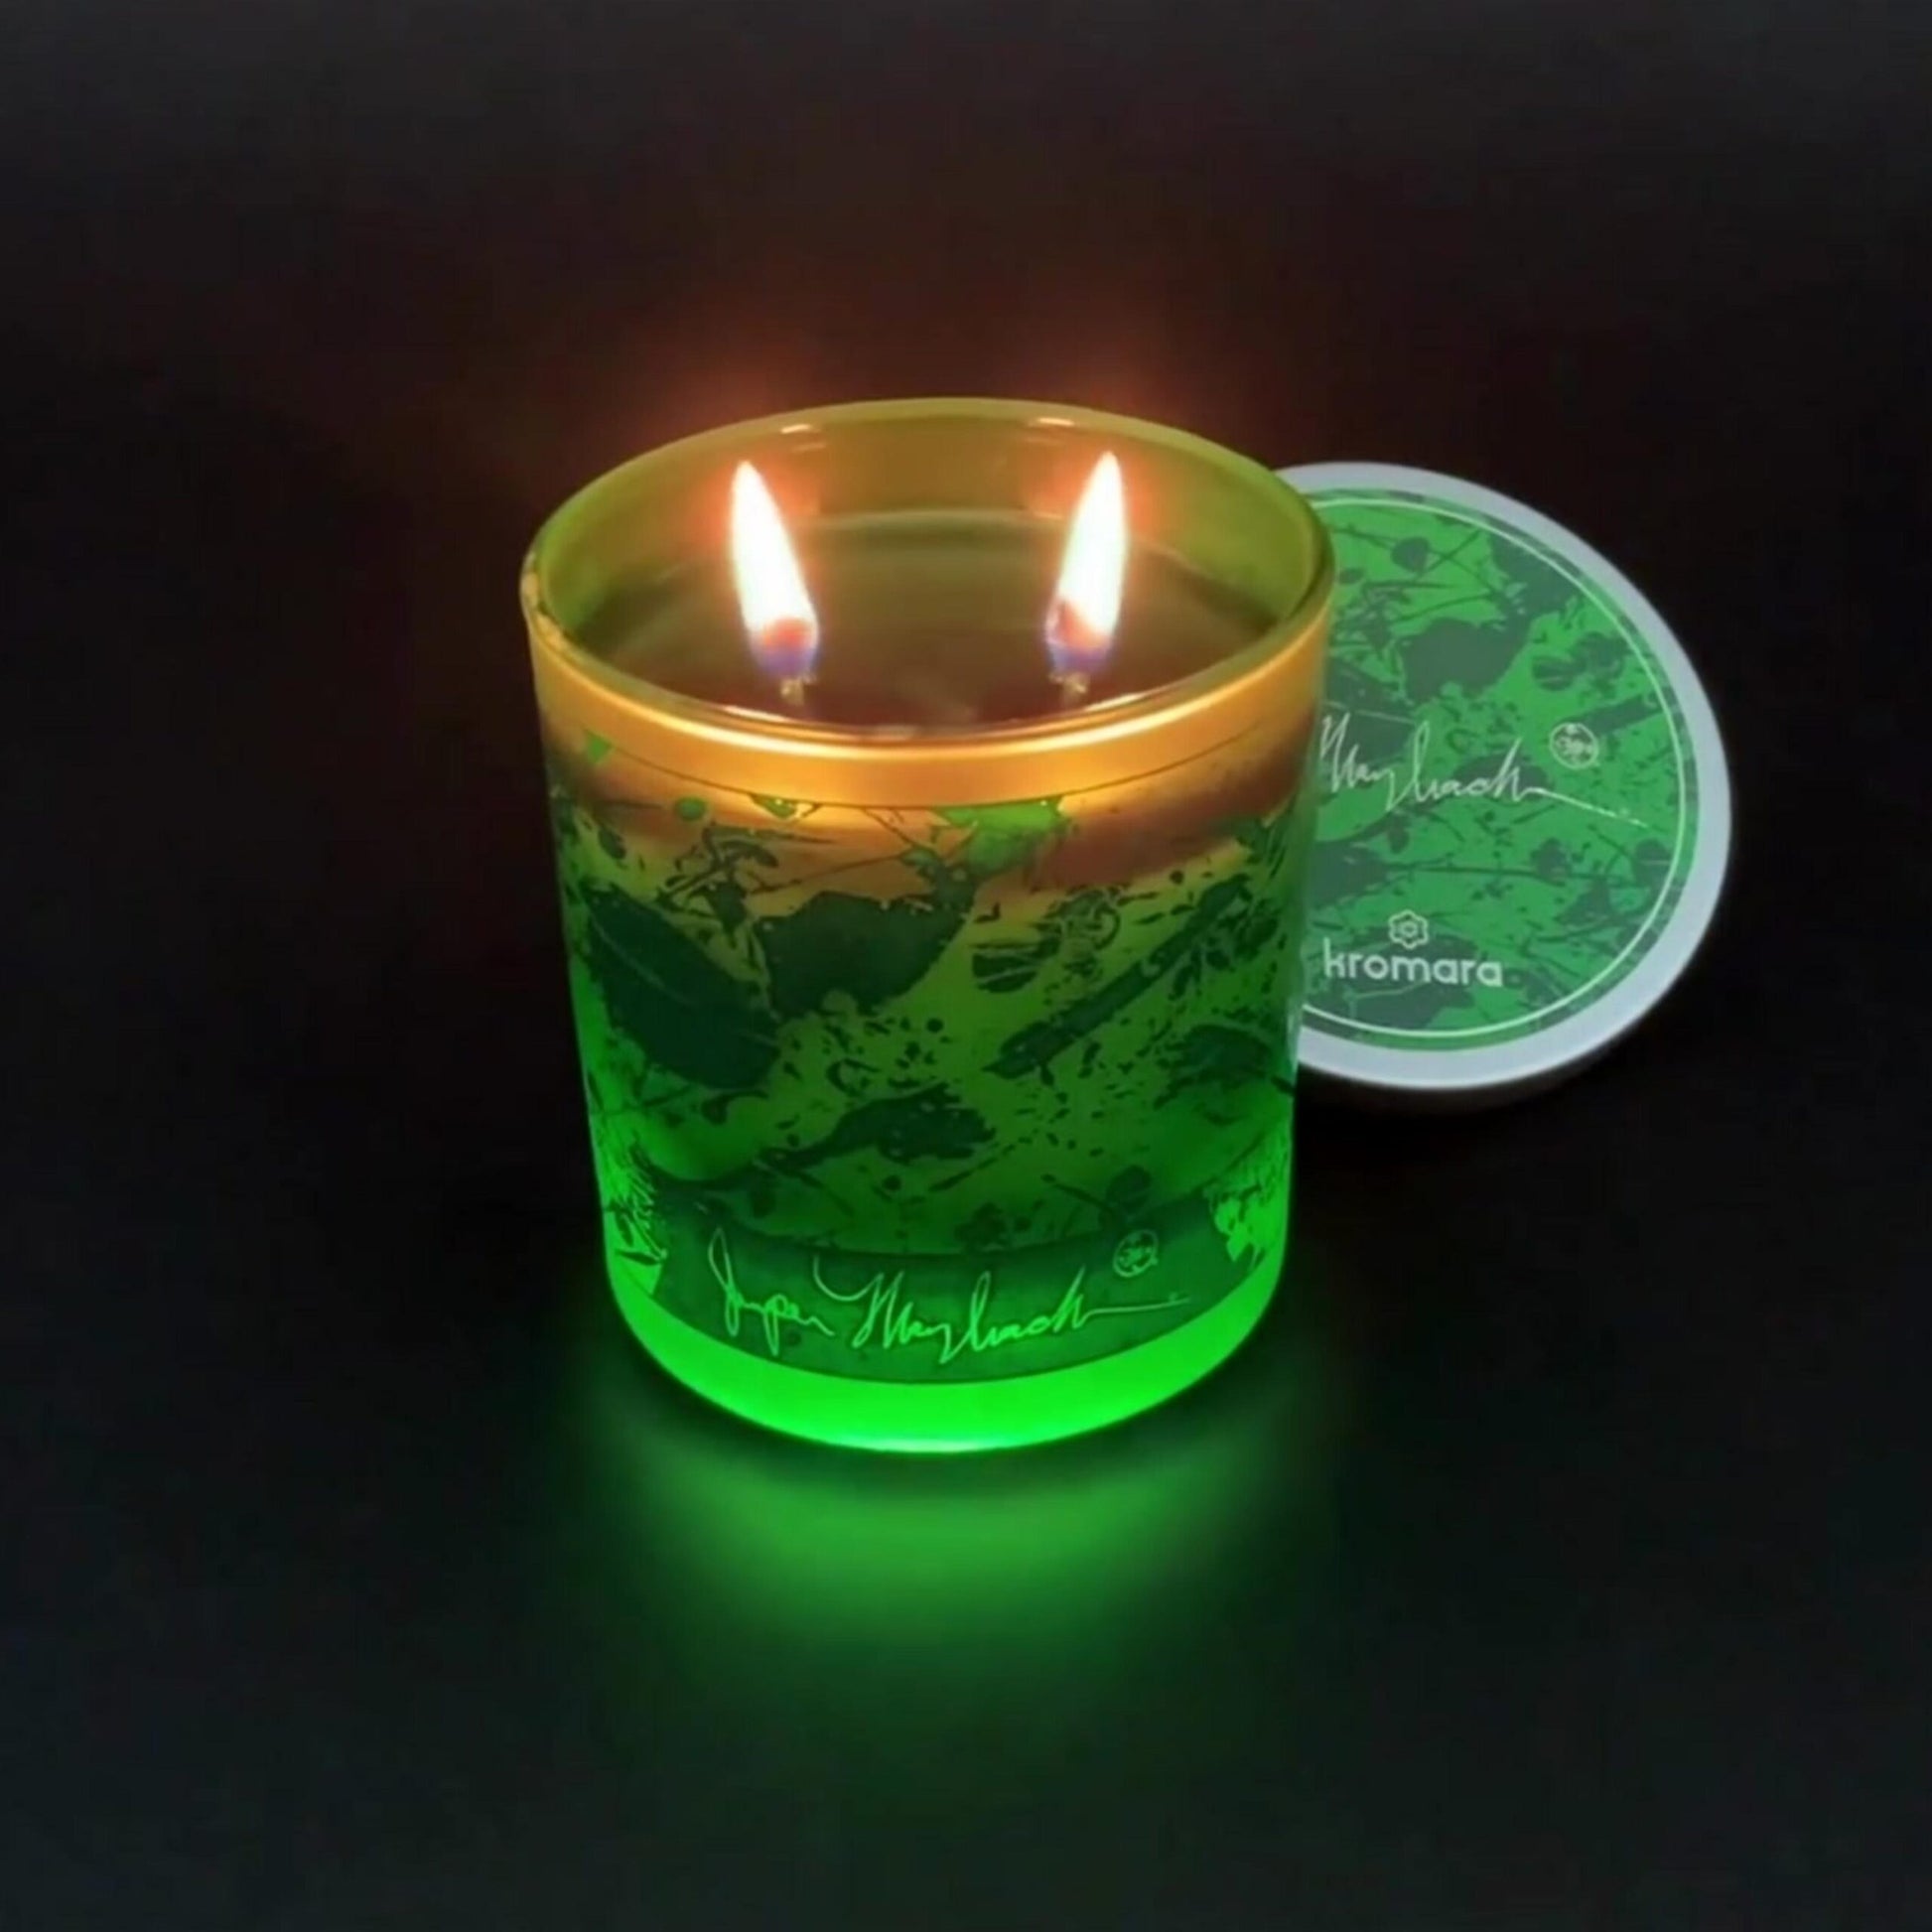 Aliens of the Earth - Candle - Jumper Maybach®